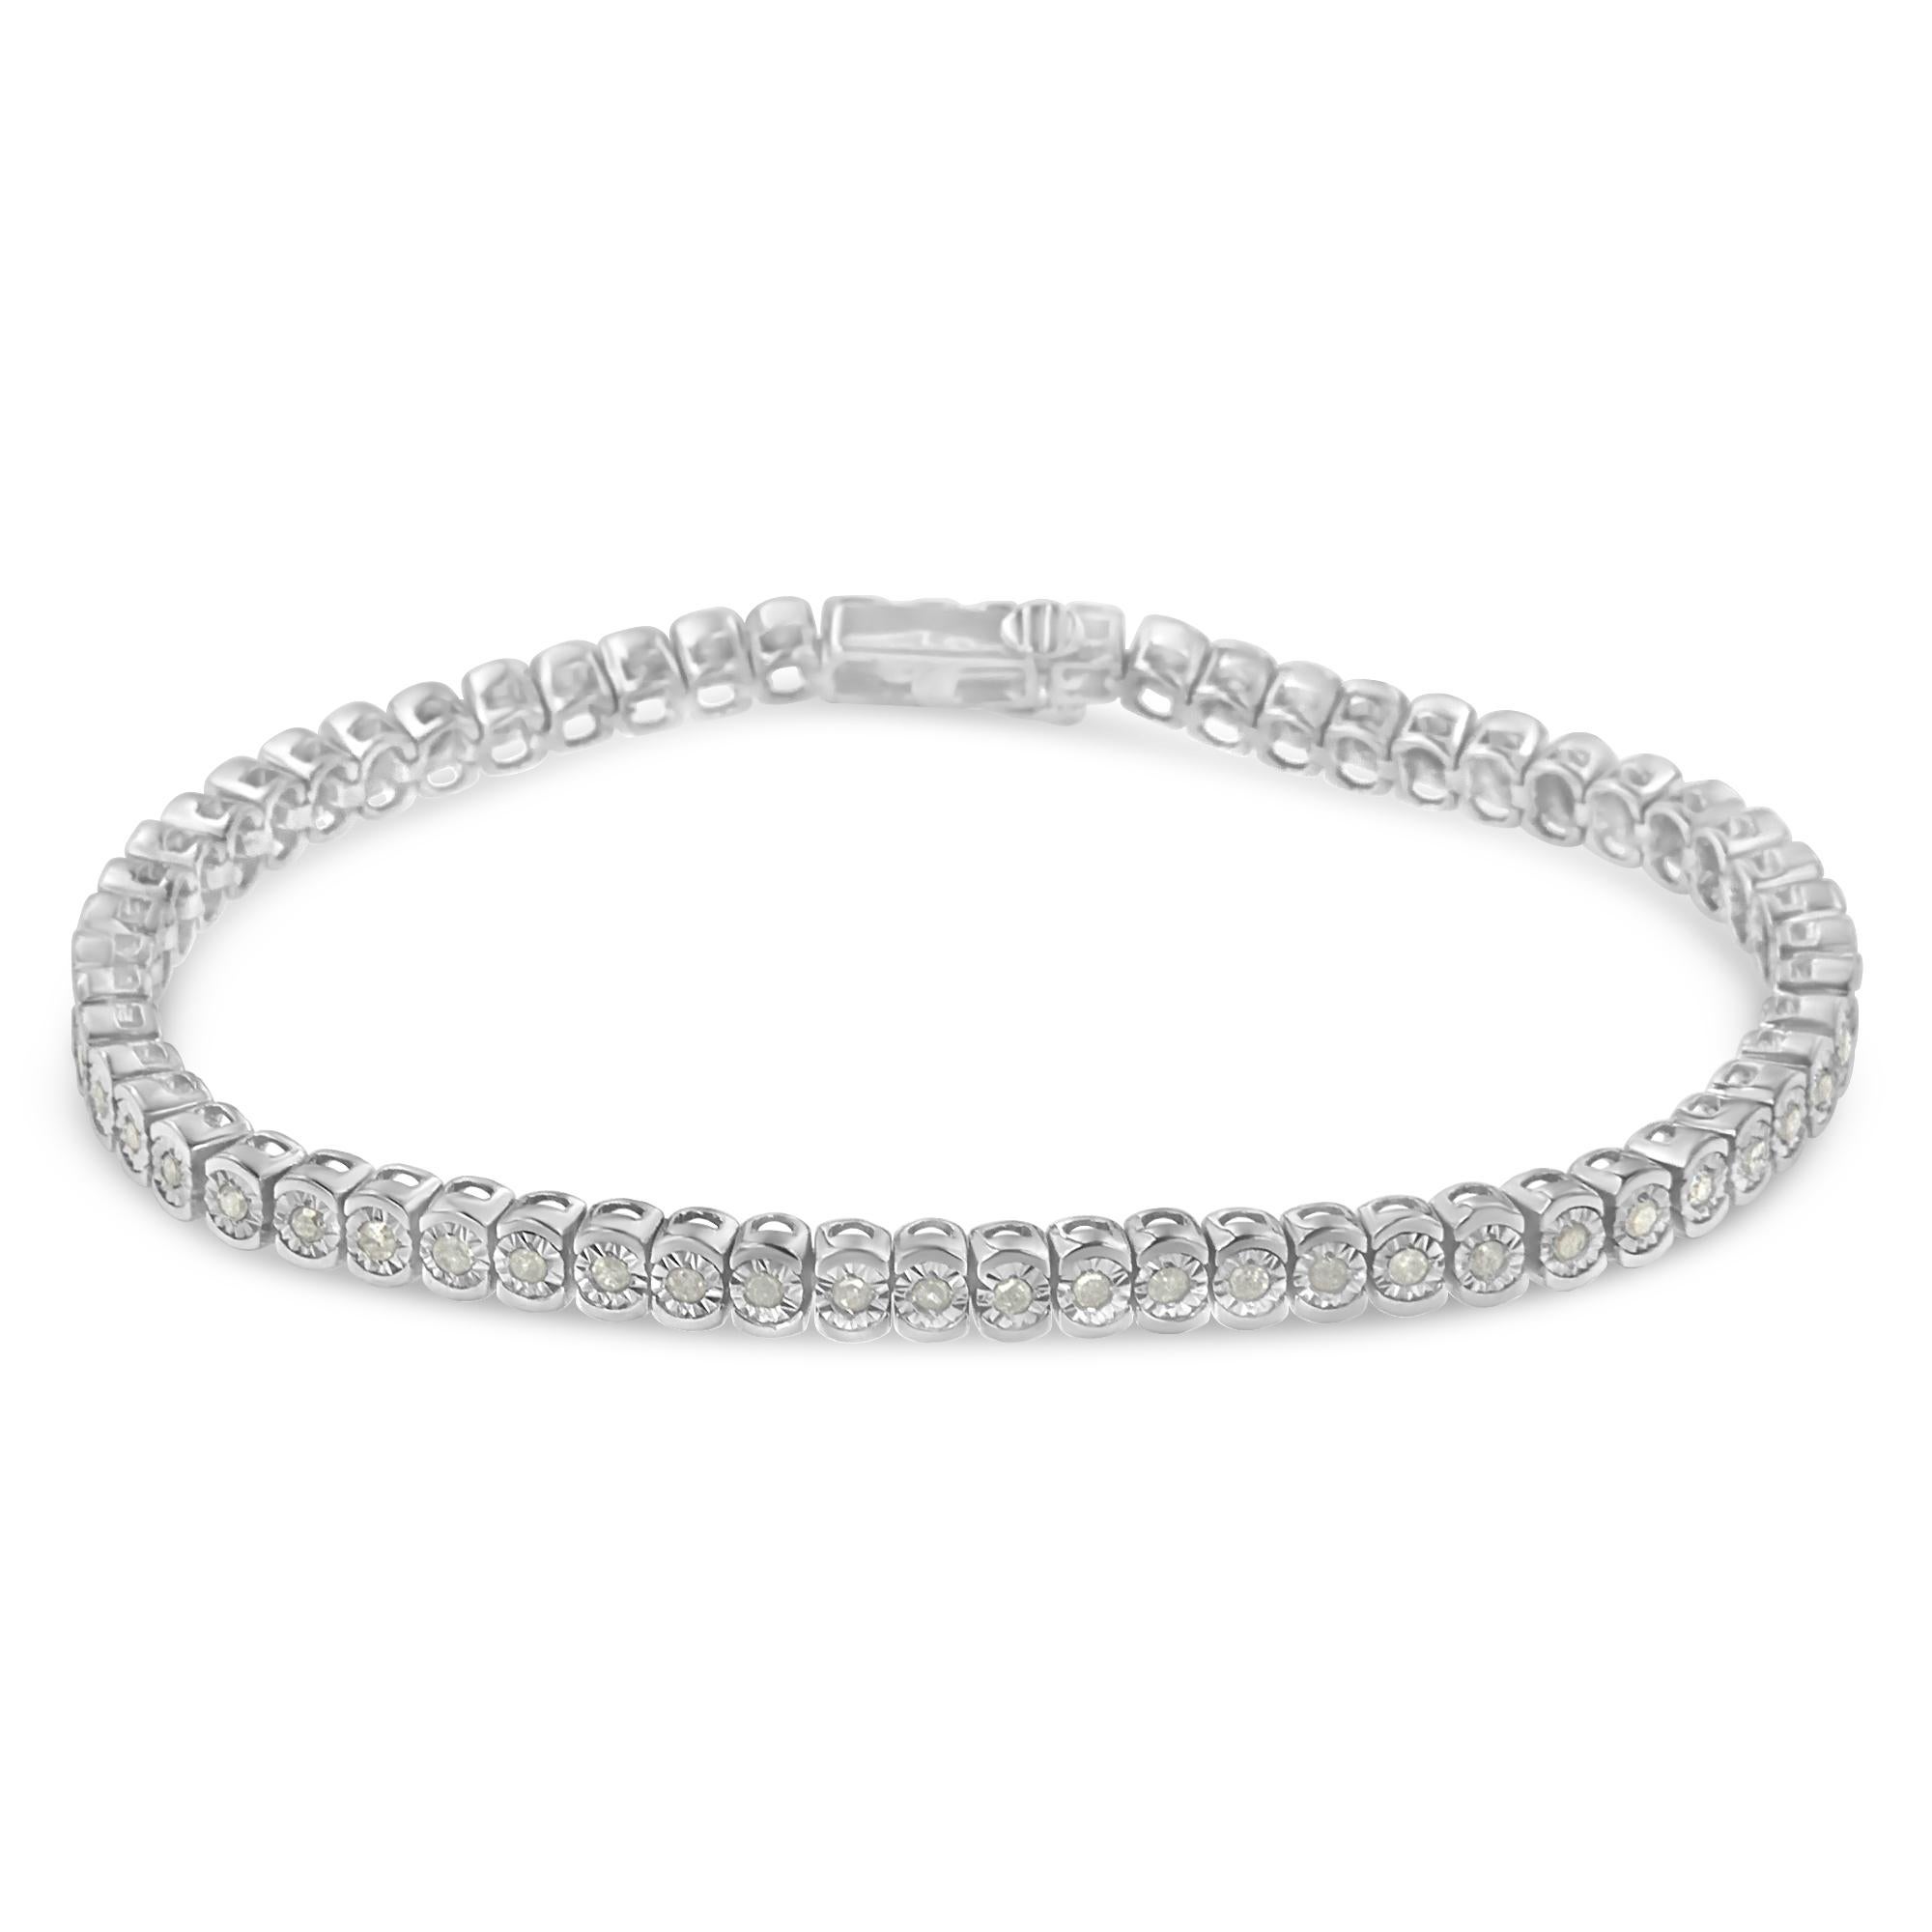 Sixty seven individual, miracle set diamonds link together to create this gorgeous tennis bracelet. Crafted in sterling silver, this classic design showcases 1ct TDW of sparkling round cut diamonds. The bracelet finishes of with a secure box clasp.